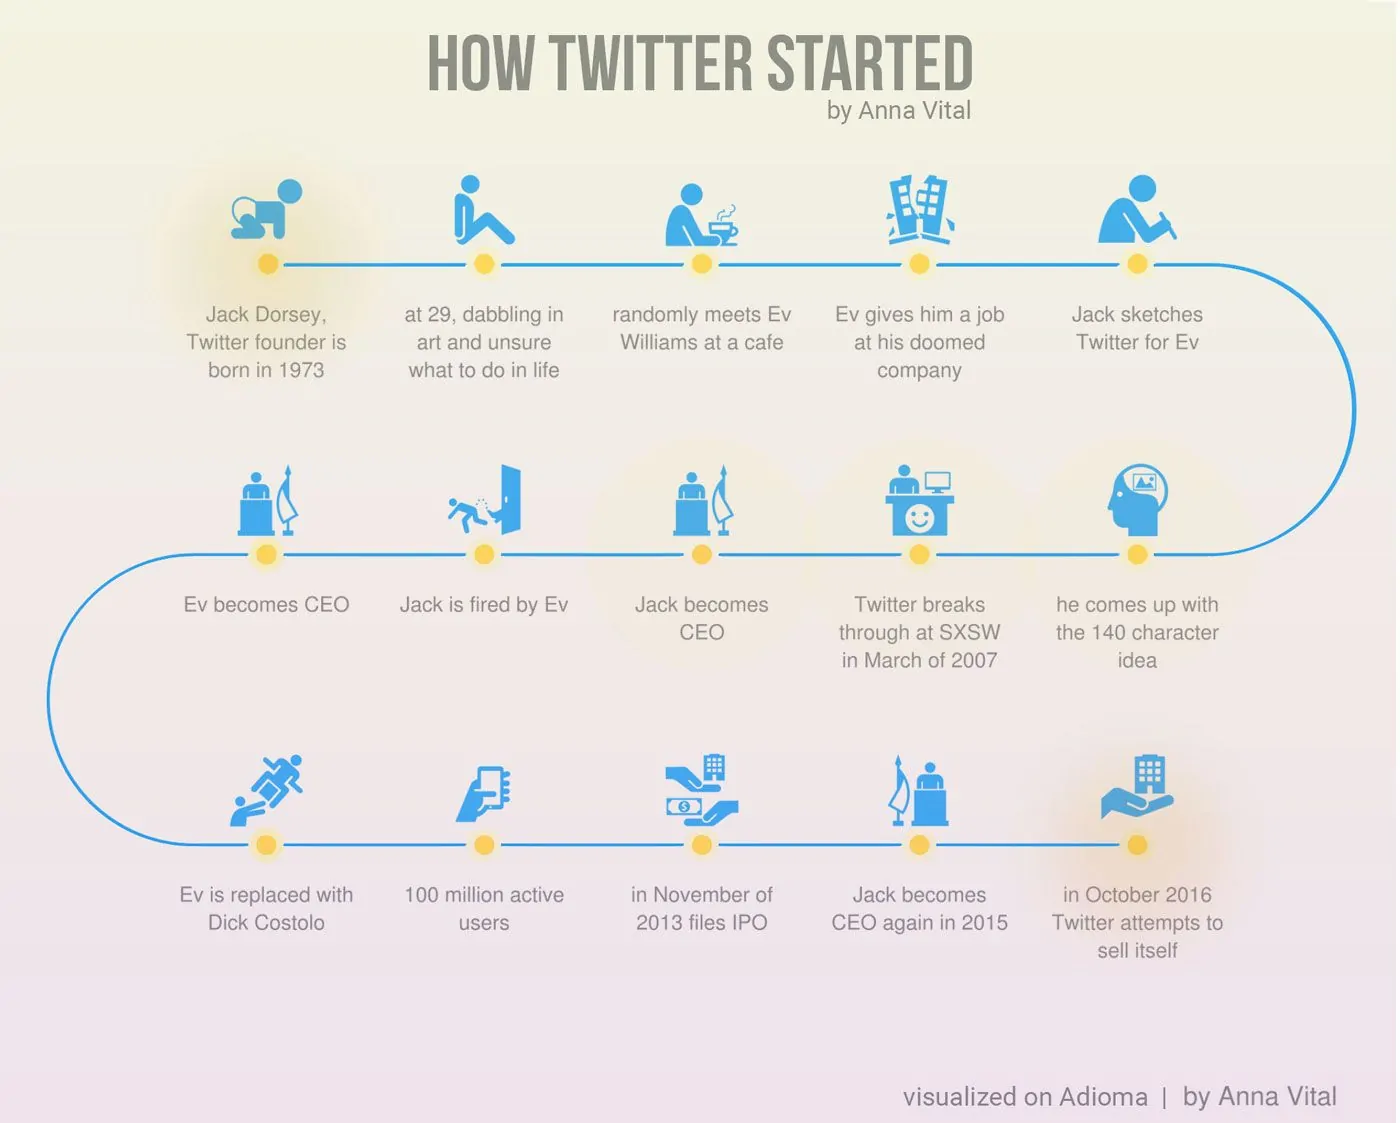 How Twitter started